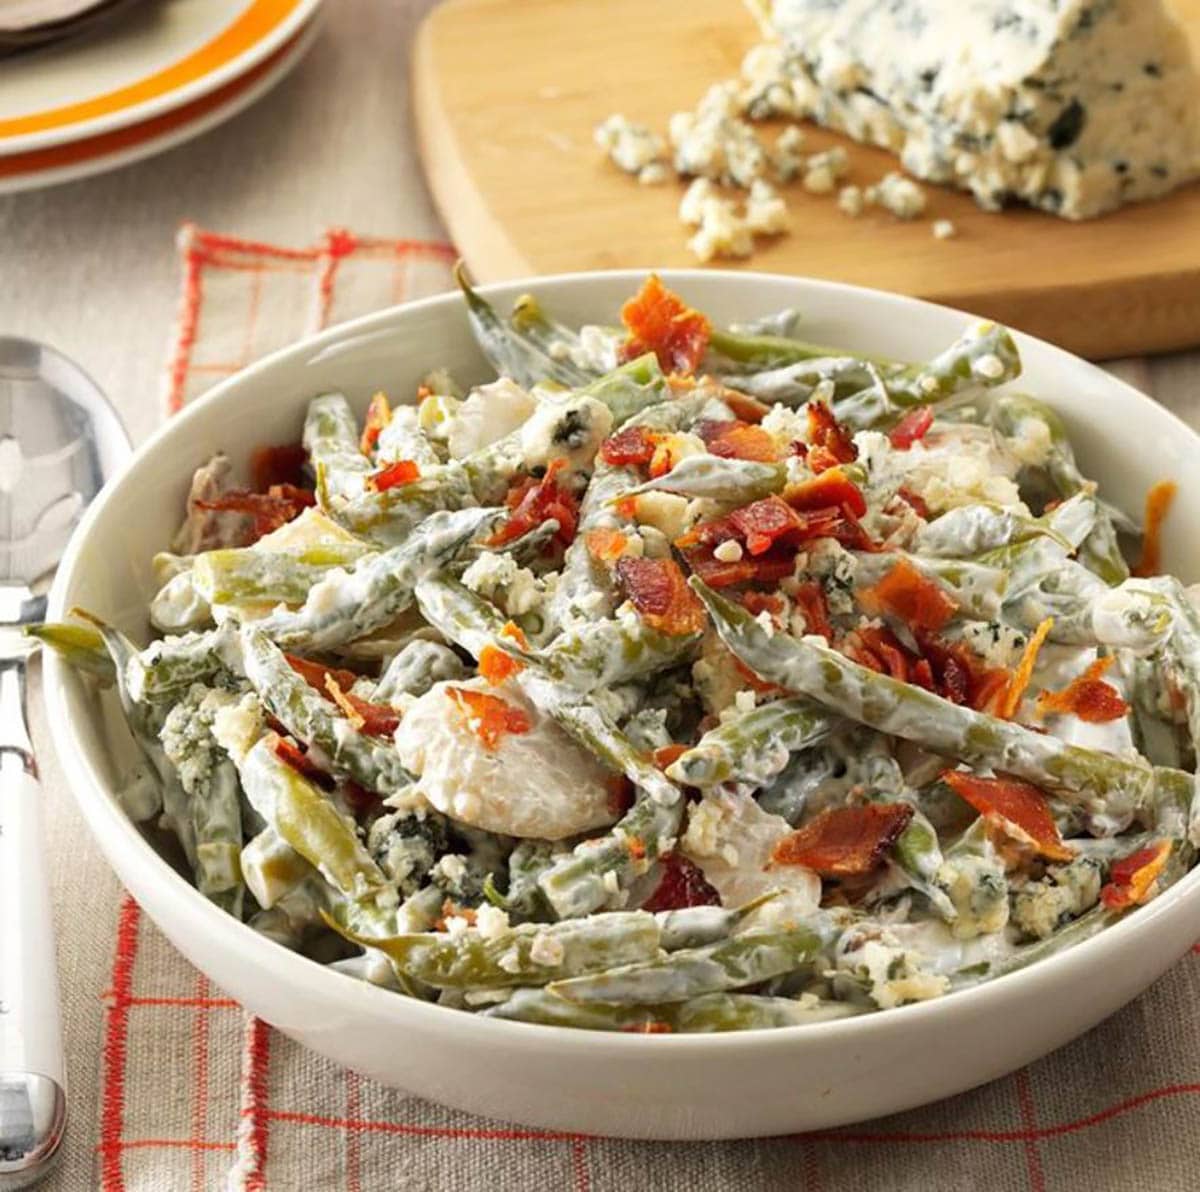 Green Beans with Gorgonzola topped with bacon and chestnuts